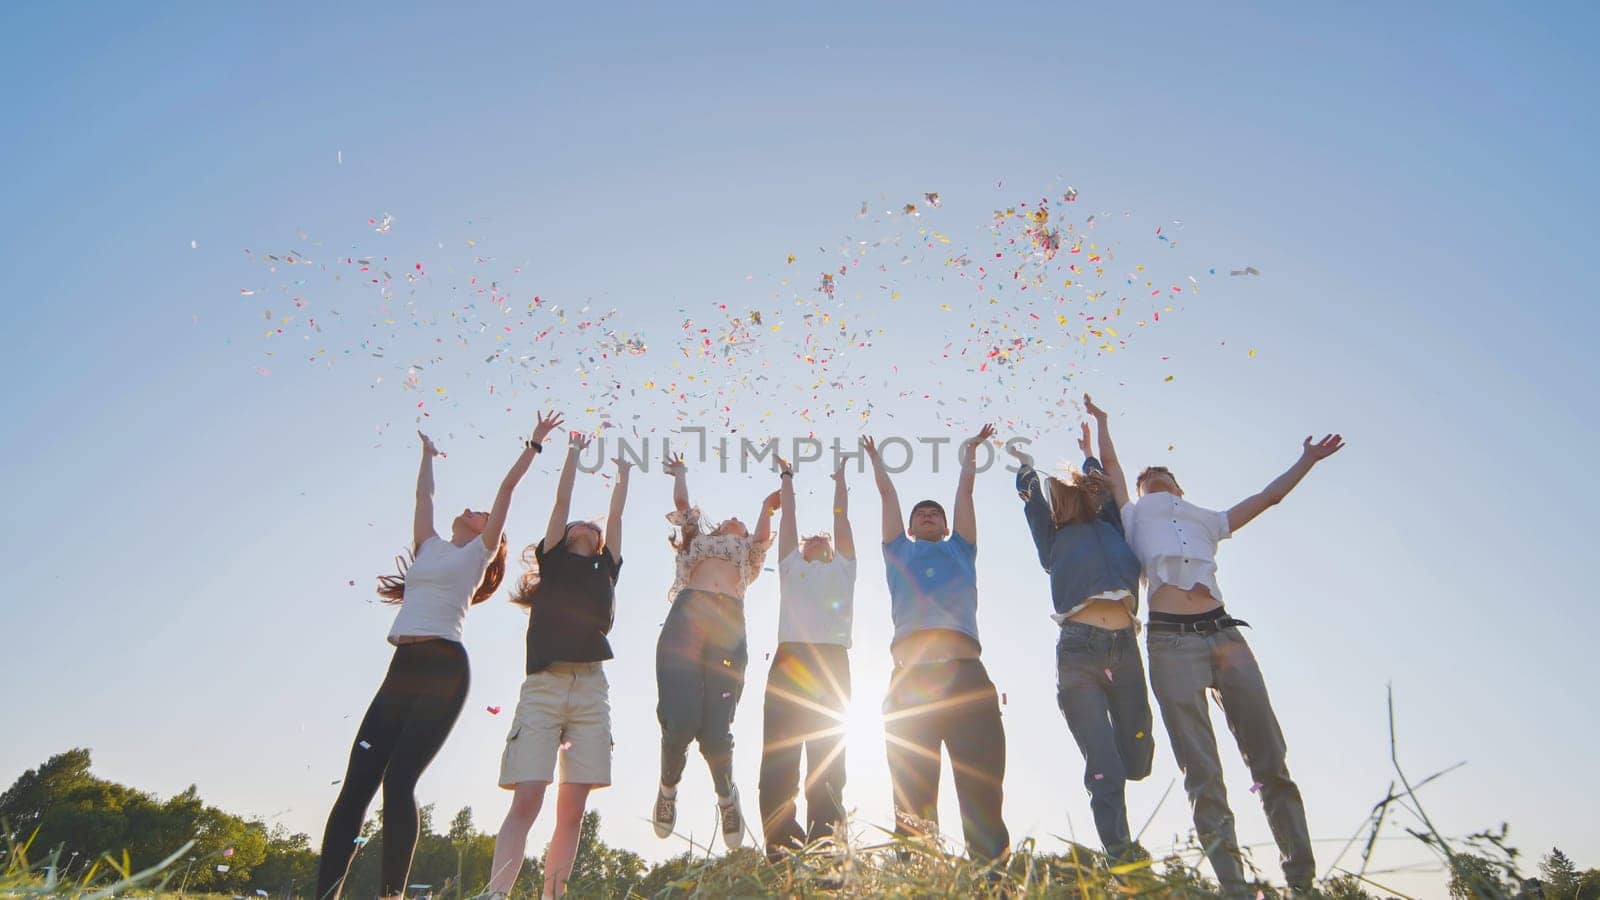 Friends toss colorful paper confetti from their hands against the rays of the evening sun